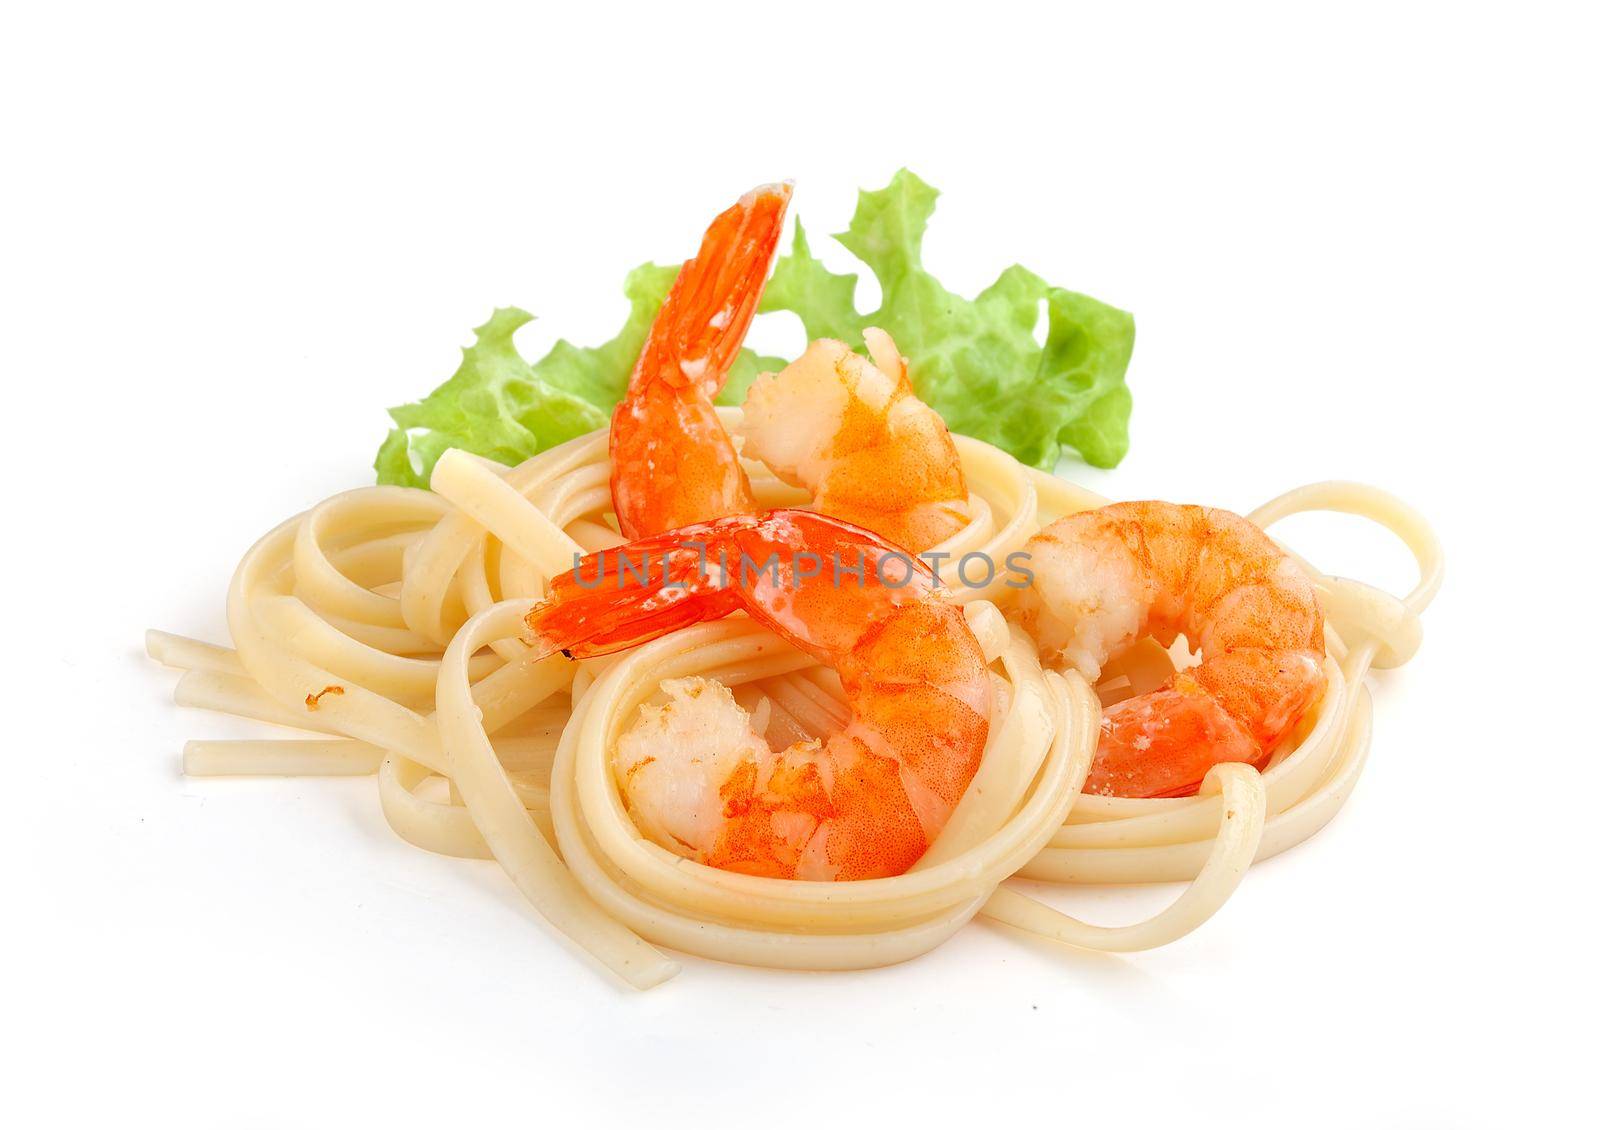 Fried shrimps with pasta and lettuce by Angorius